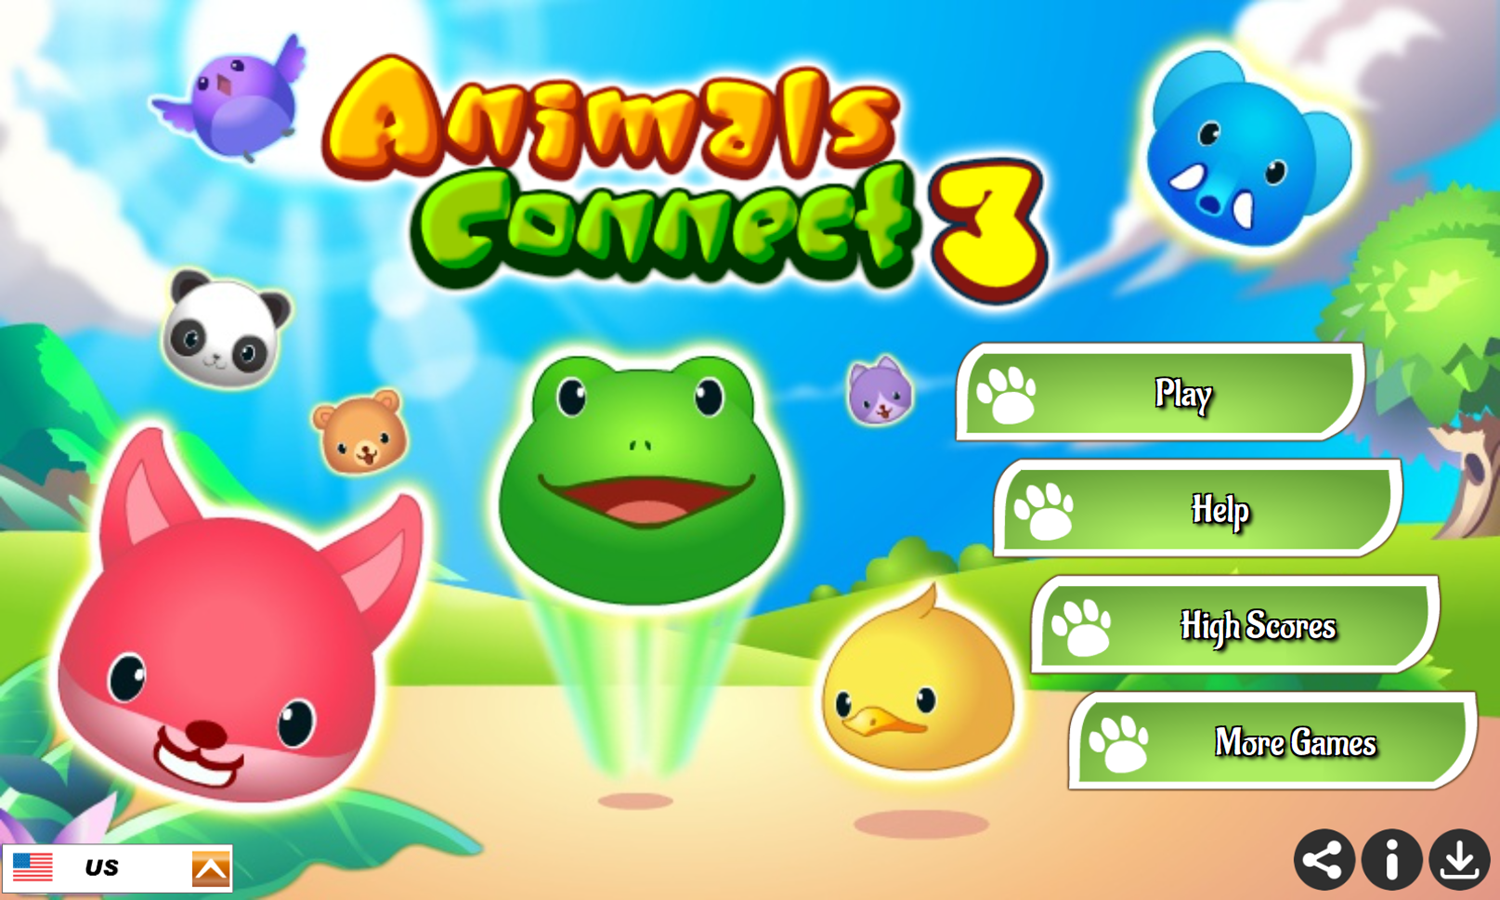 Animals Connect 3 Game Welcome Screen Screenshot.